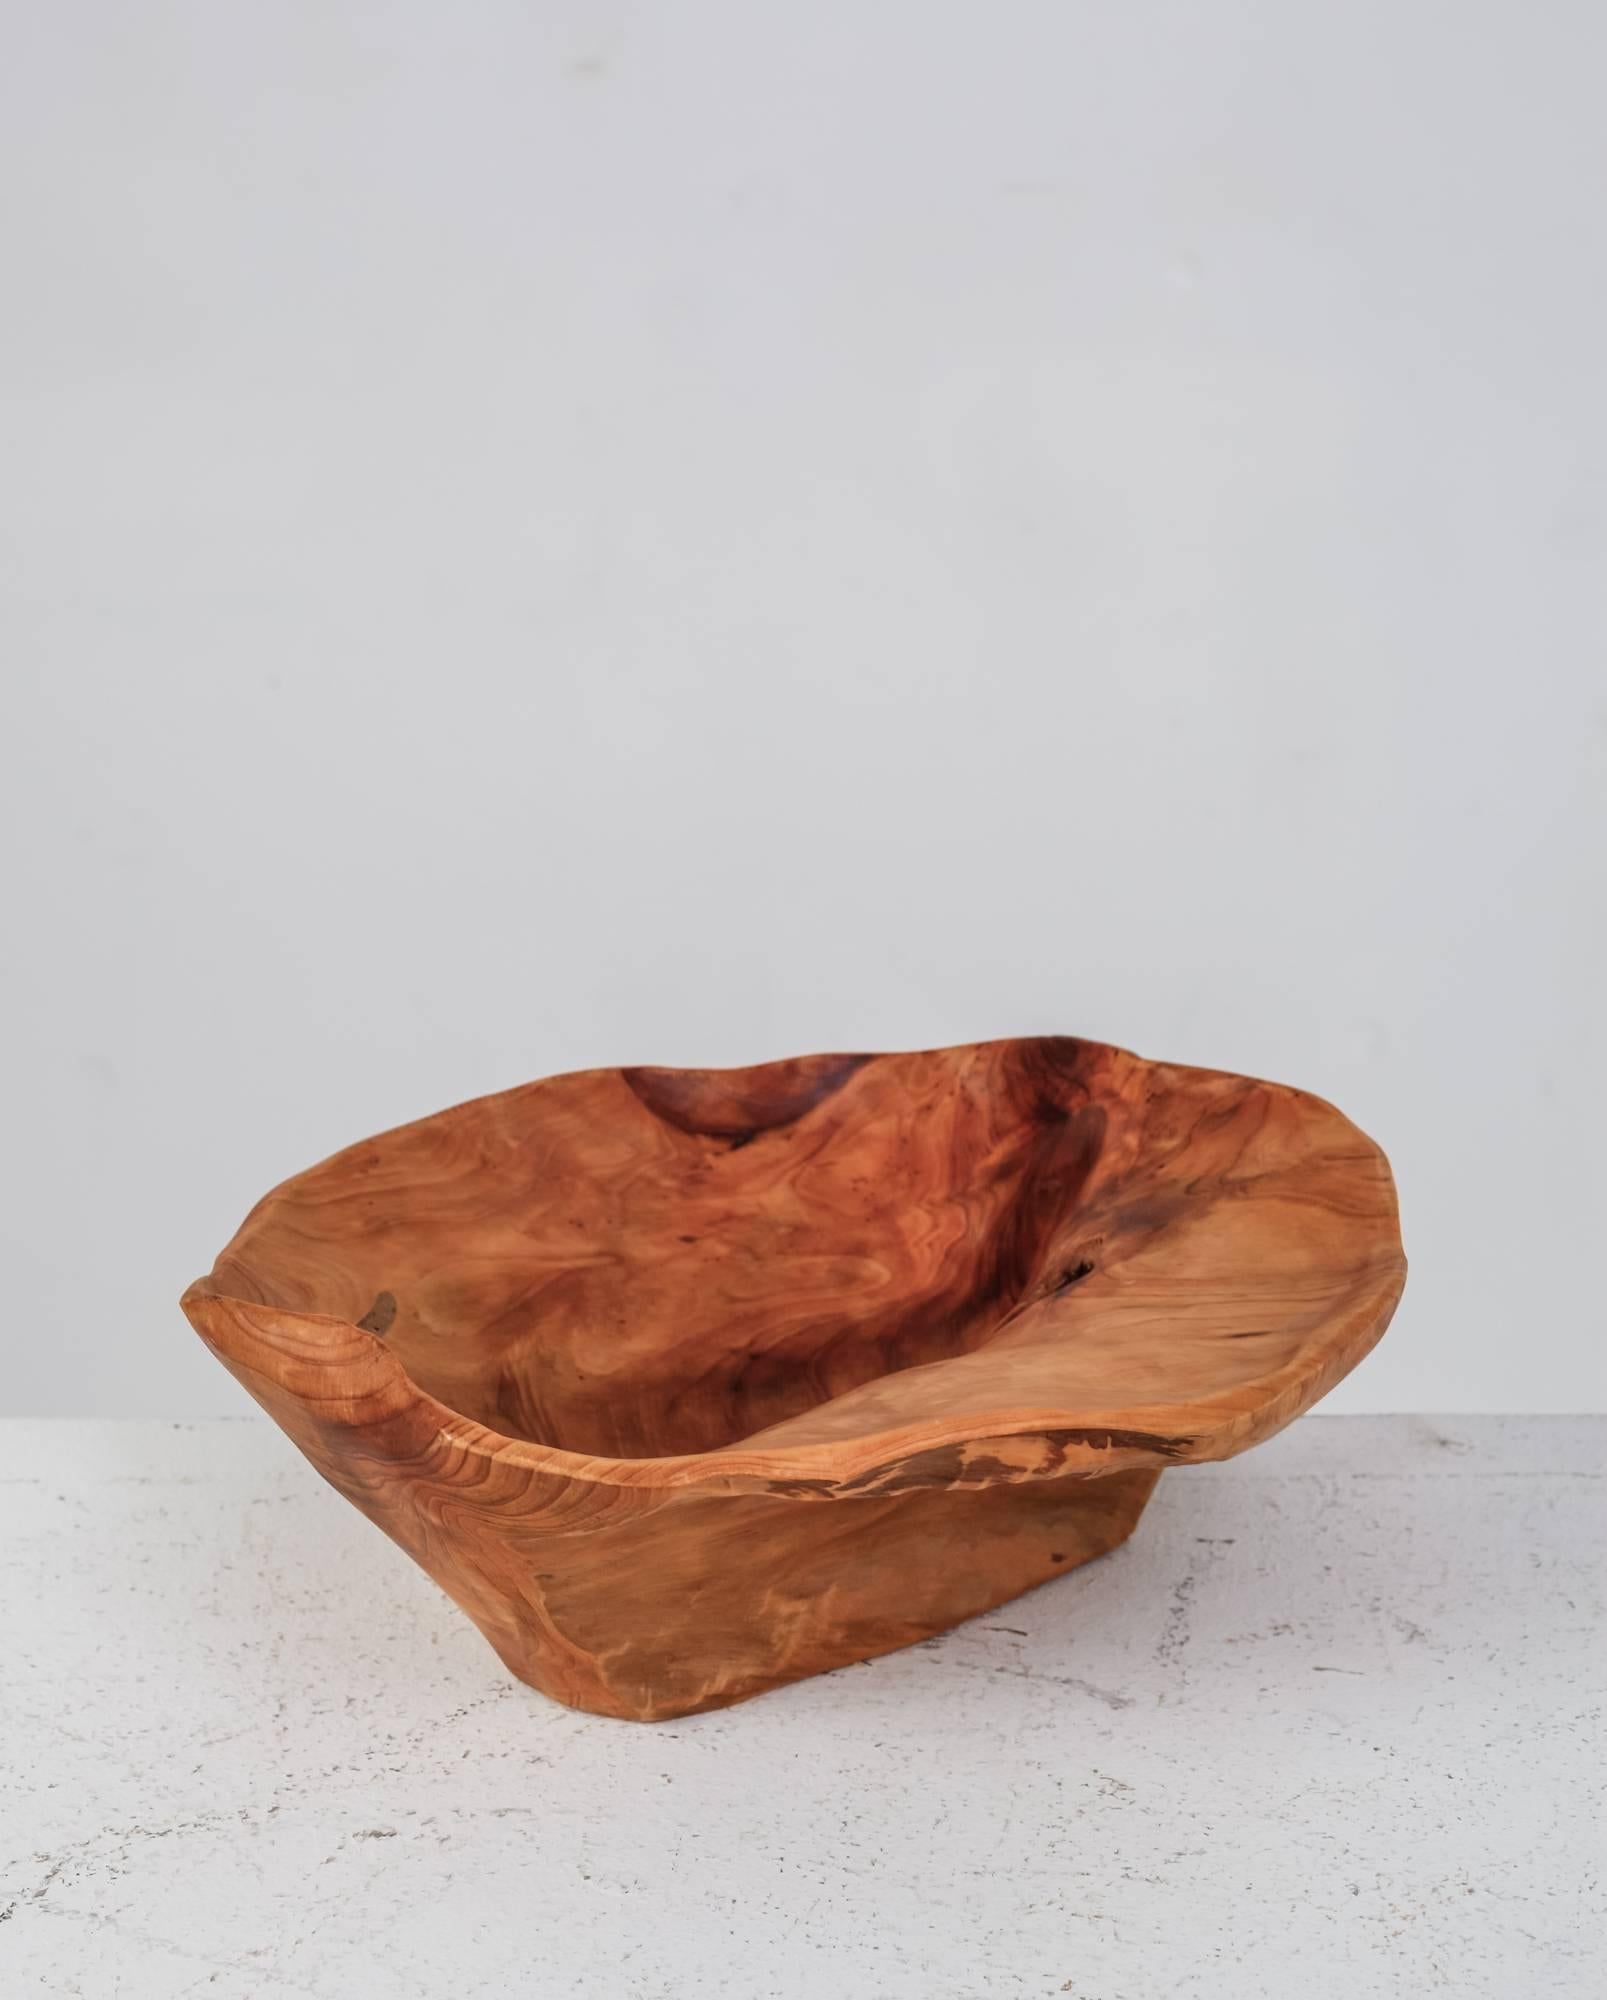 American Organically Shaped Wooden Bowl, Signed 'CC 72', USA